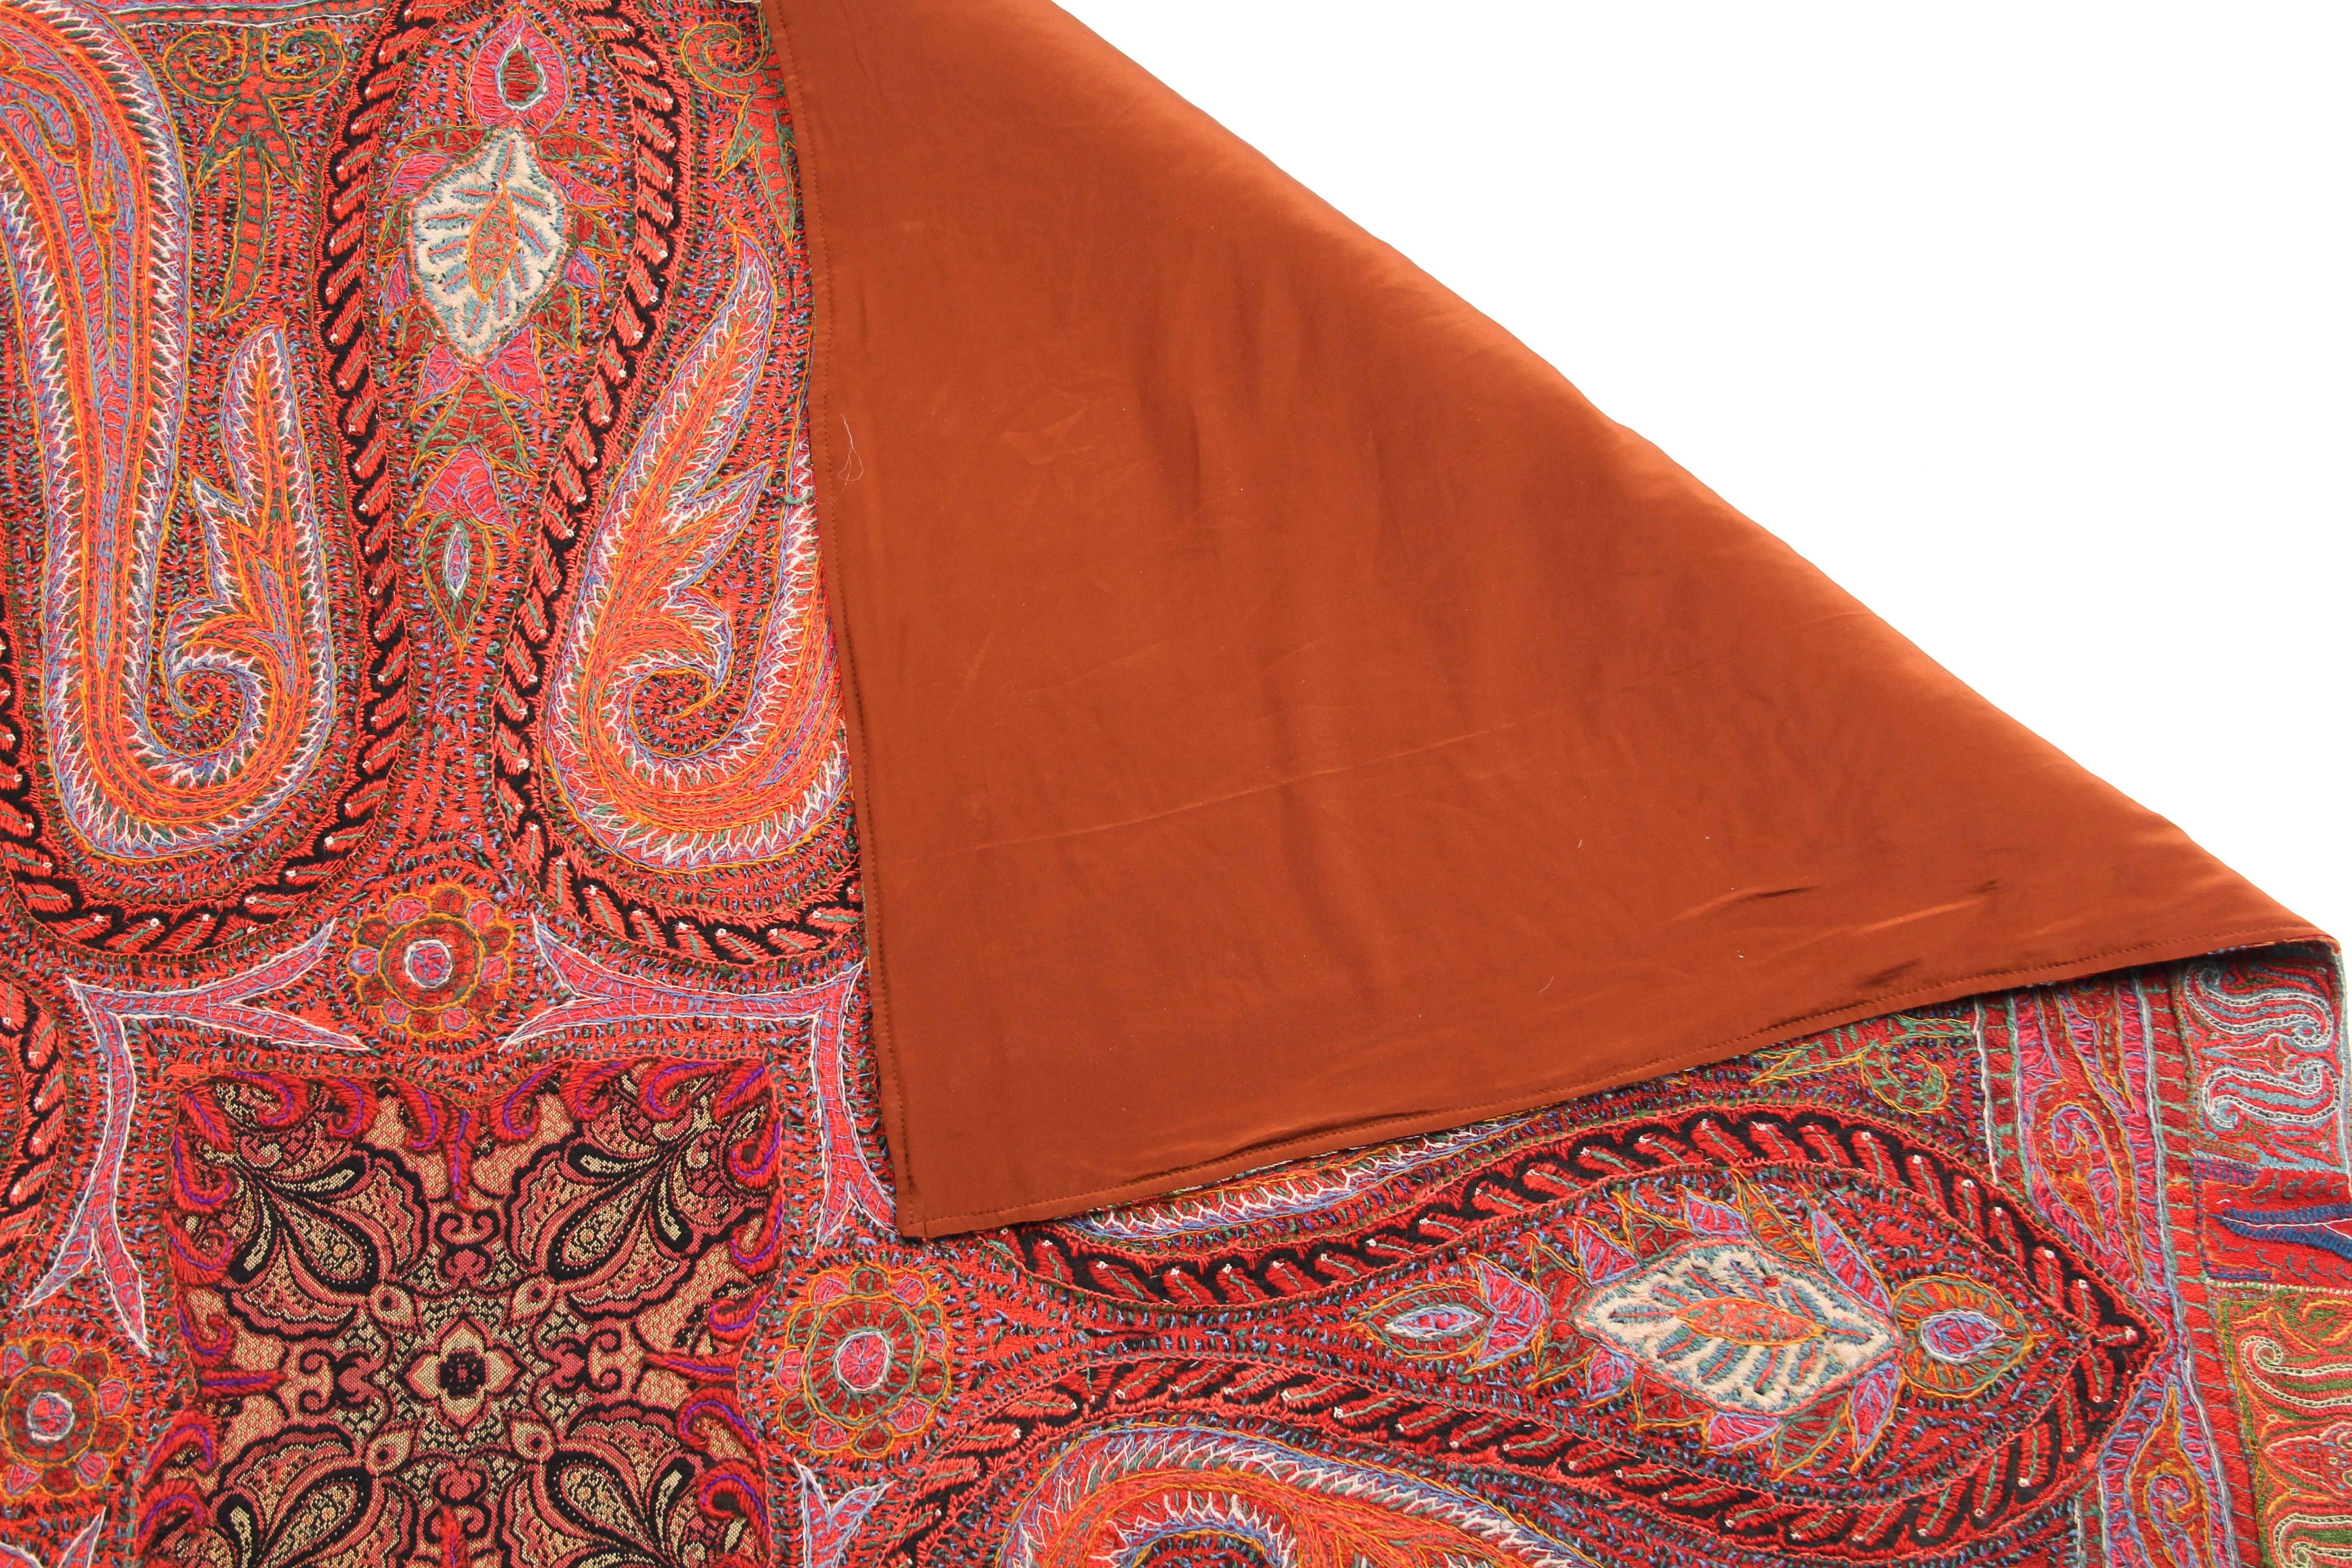 This is a stunning paisley scarf covered in intricate embroidery. The crewelwork is done in strands of wool floss worked over a red twill base, and a pumpkin silk lining hides the back side of the embroidery and gives the scarf a smooth and